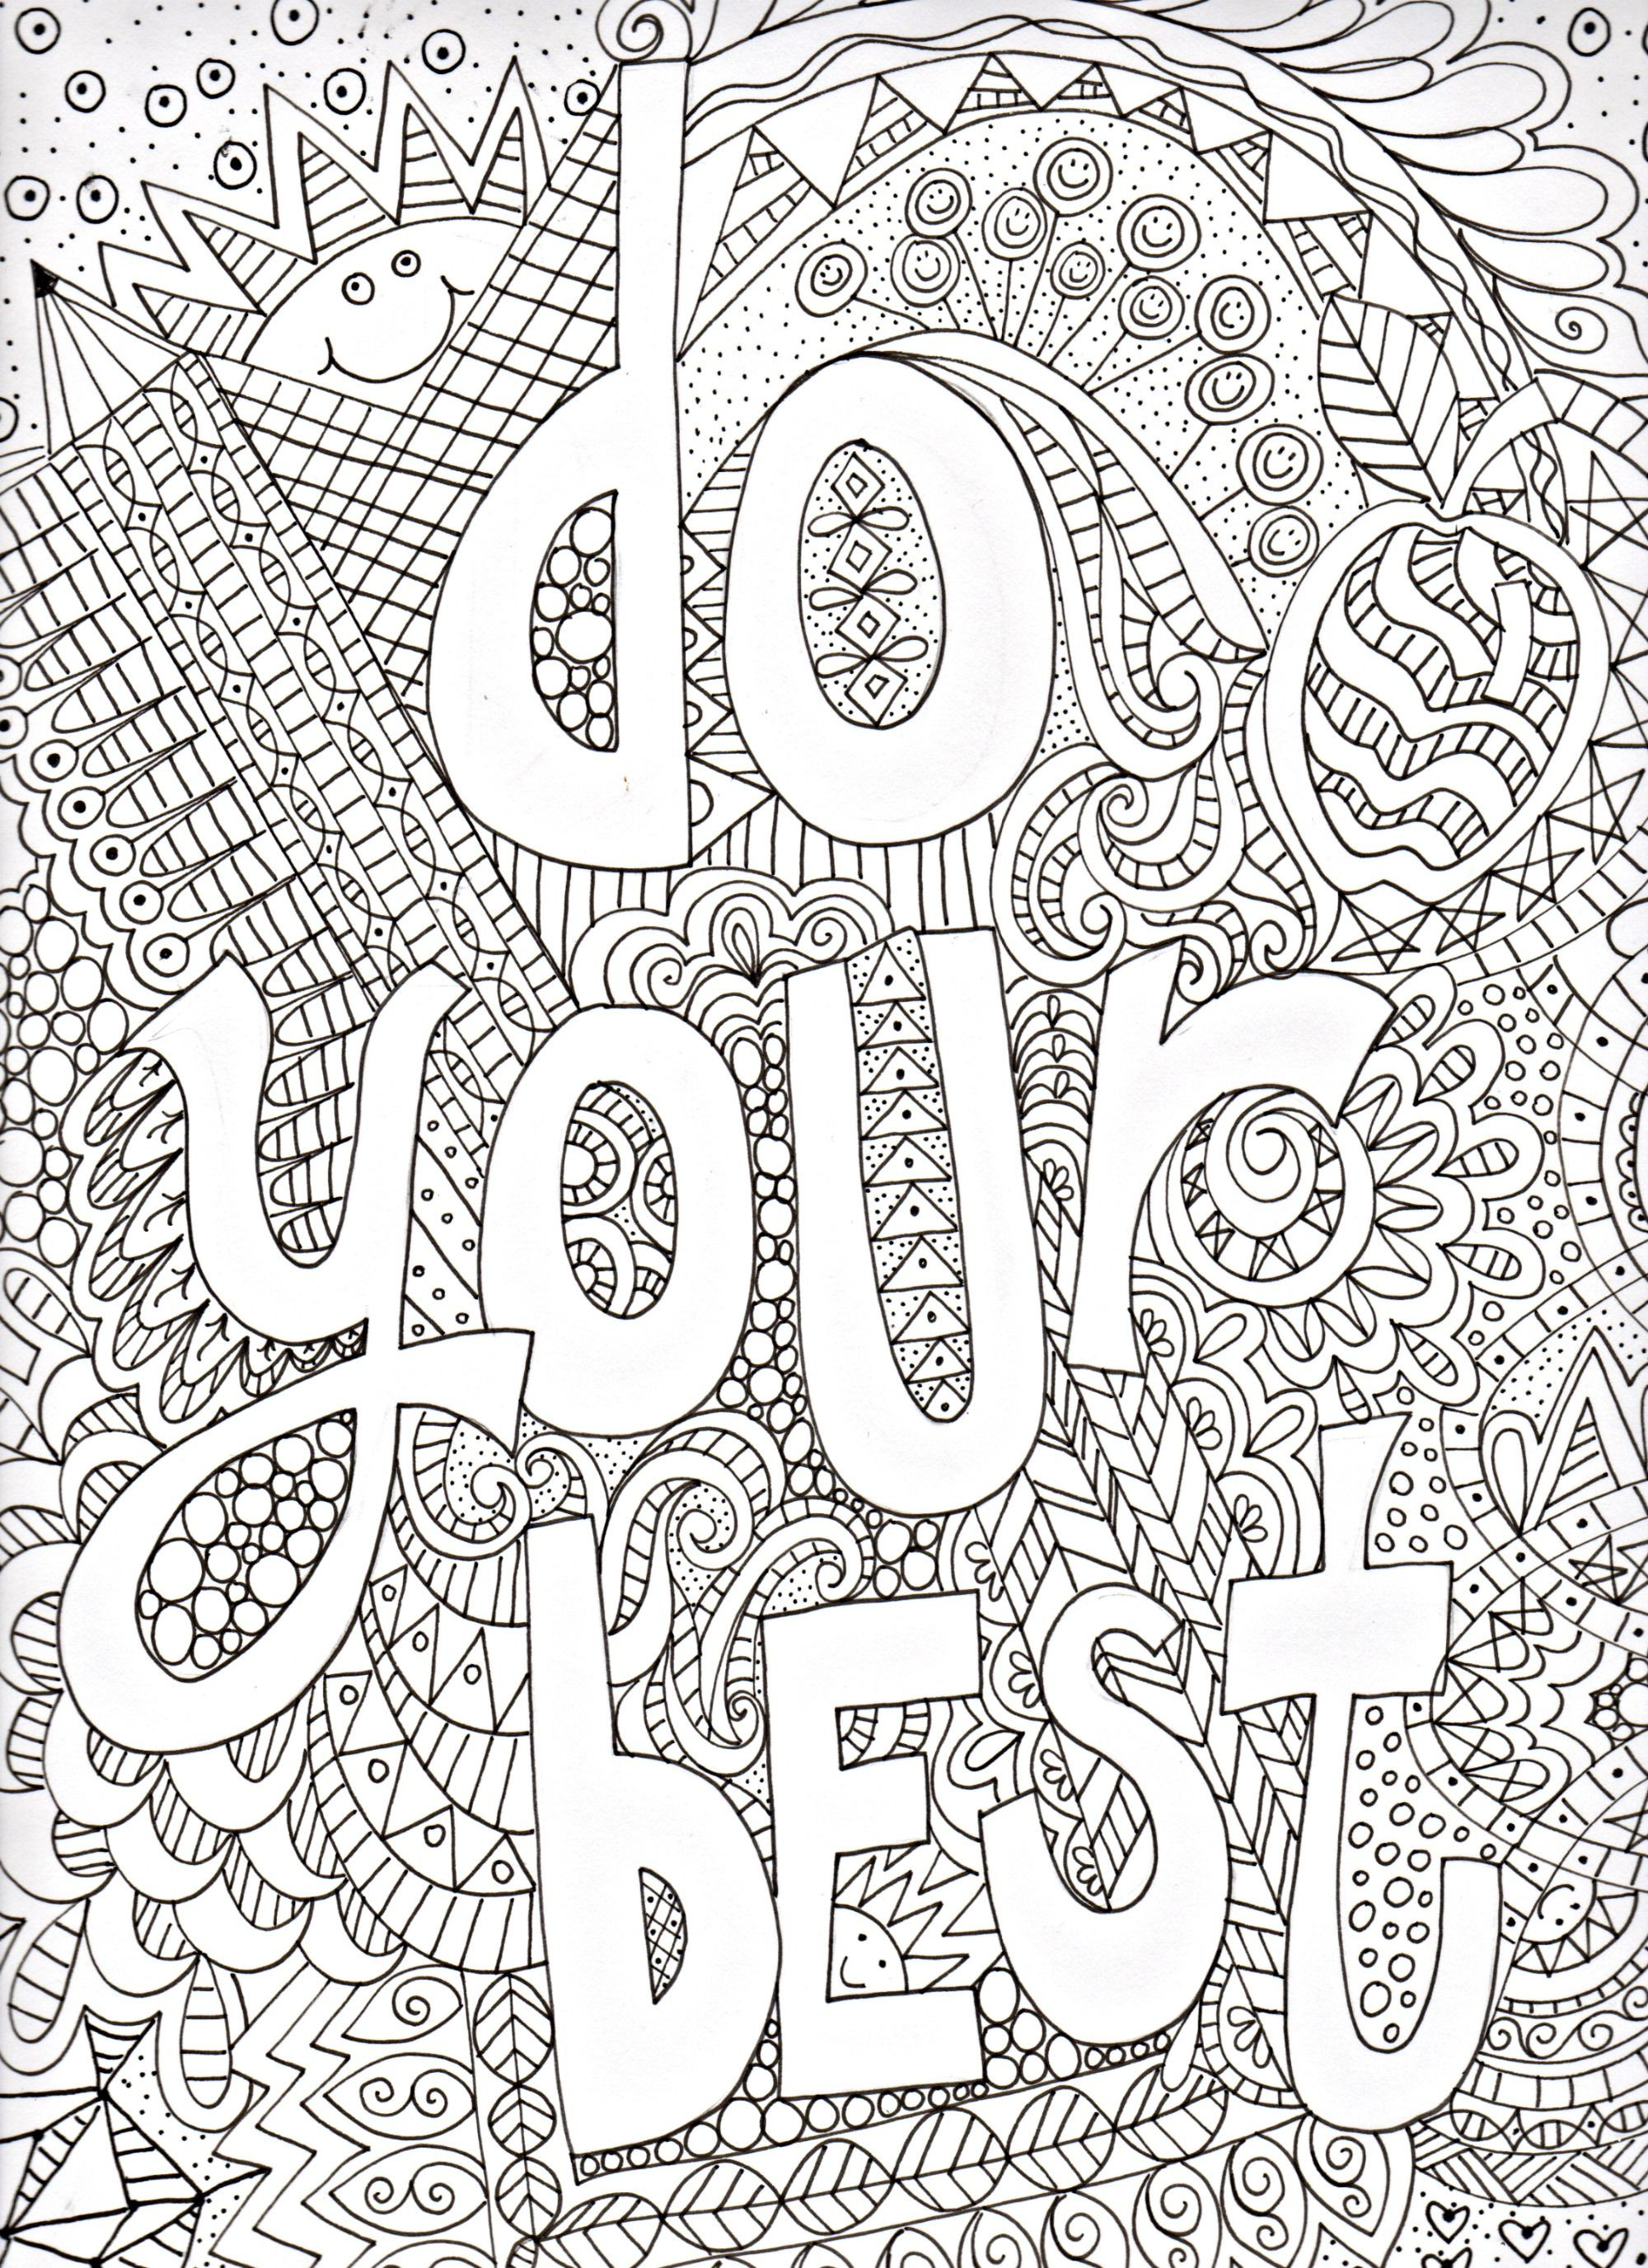 Free Coloring Sheets To Print
 Free Doodle Art Coloring Pages Coloring Home